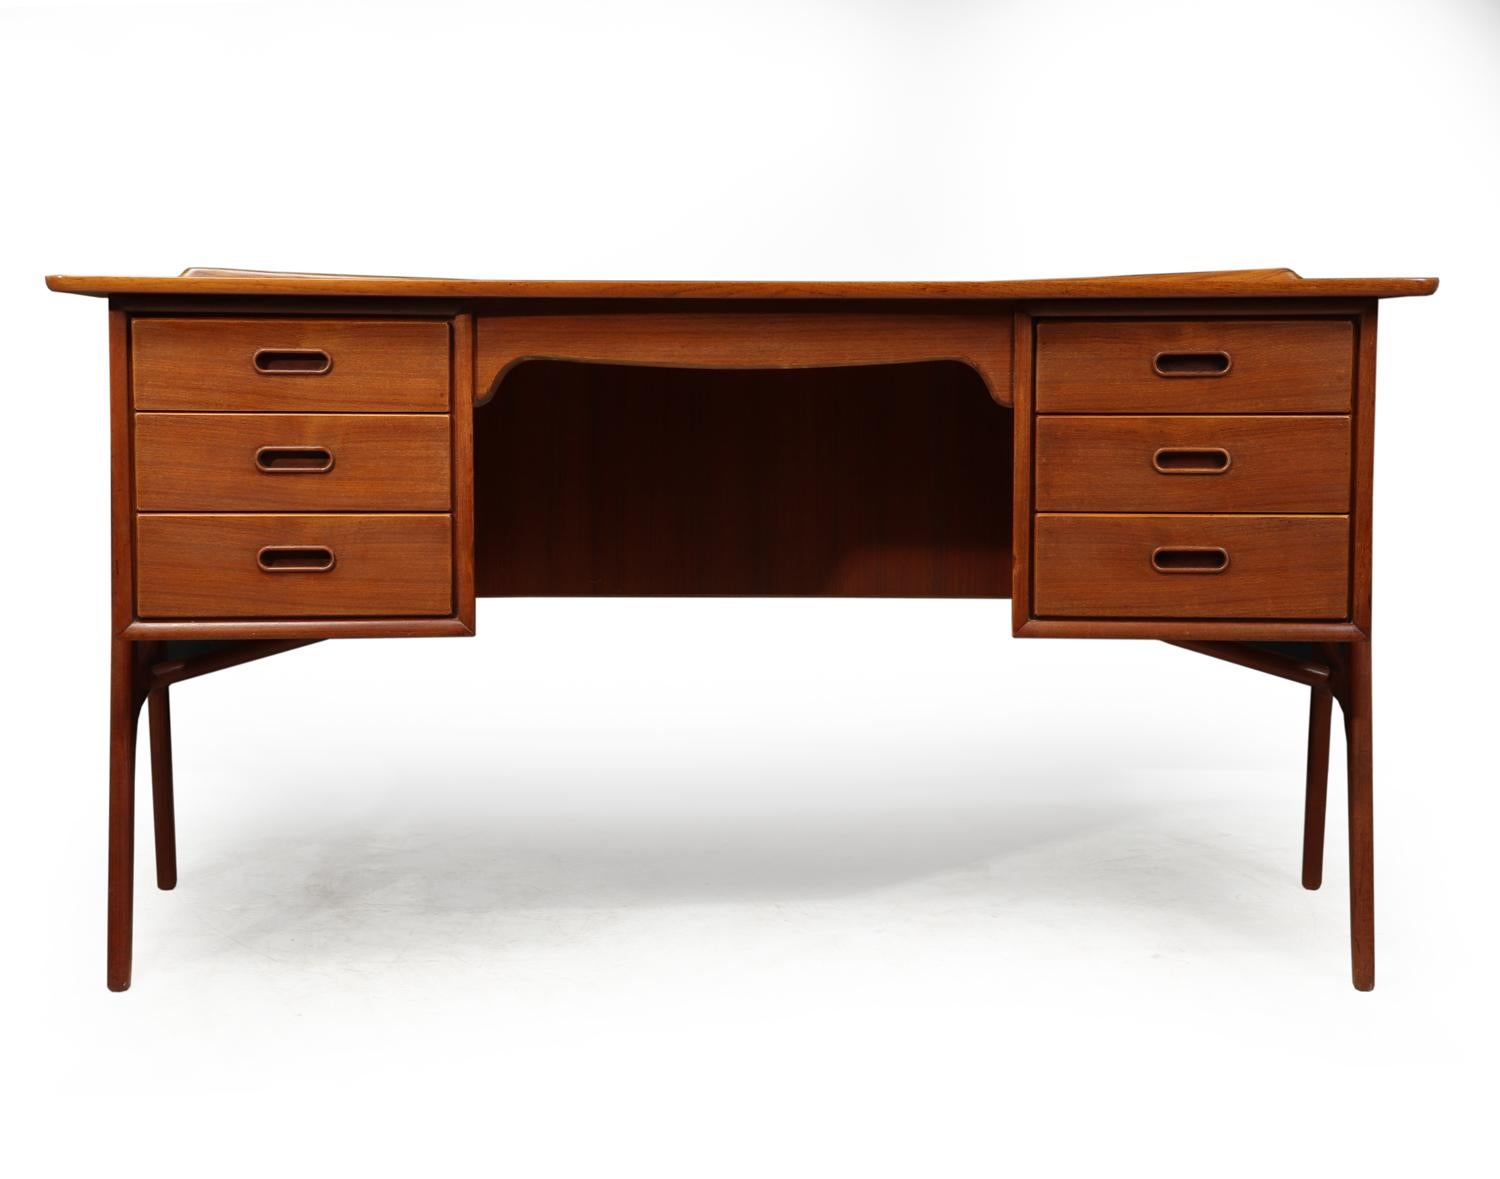 midcentury Teak SH 180 Desk by Svend Madsen, circa 1950
Svend Aage Madsen designed this teak desk, model SH 180, for Sigurd Hansen Møbelfabrik in the early 1960s. The curved case sits on a sculpted frame with contrasting solid Teak sculpted legs.